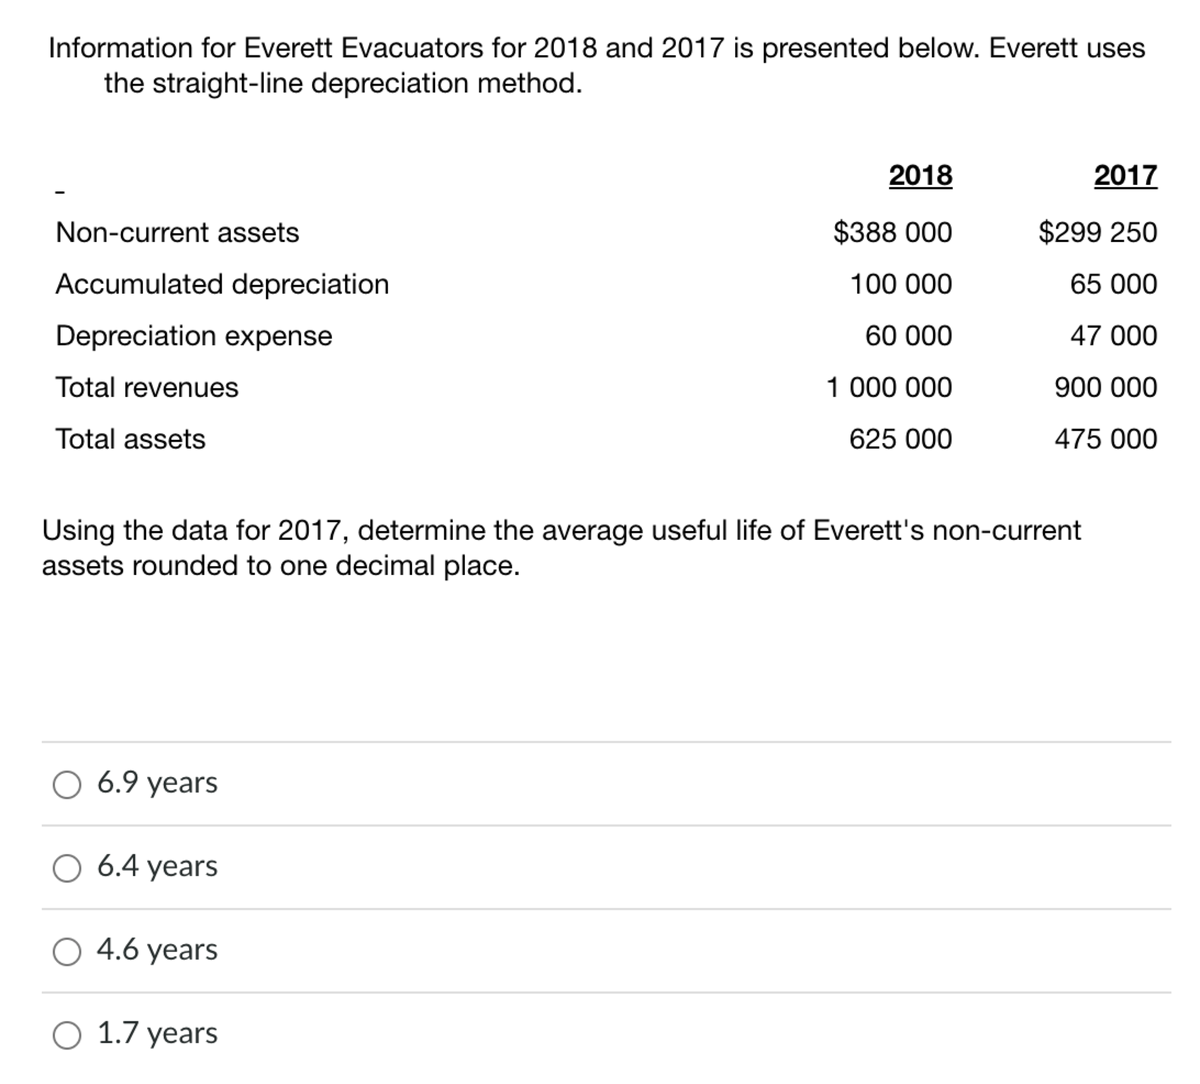 Information for Everett Evacuators for 2018 and 2017 is presented below. Everett uses
the straight-line depreciation method.
2018
2017
Non-current assets
$388 000
$299 250
Accumulated depreciation
100 000
65 000
Depreciation expense
60 000
47 000
Total revenues
1 000 000
900 000
Total assets
625 000
475 000
Using the data for 2017, determine the average useful life of Everett's non-current
assets rounded to one decimal place.
O 6.9 years
6.4 years
O 4.6 years
O 1.7 years
